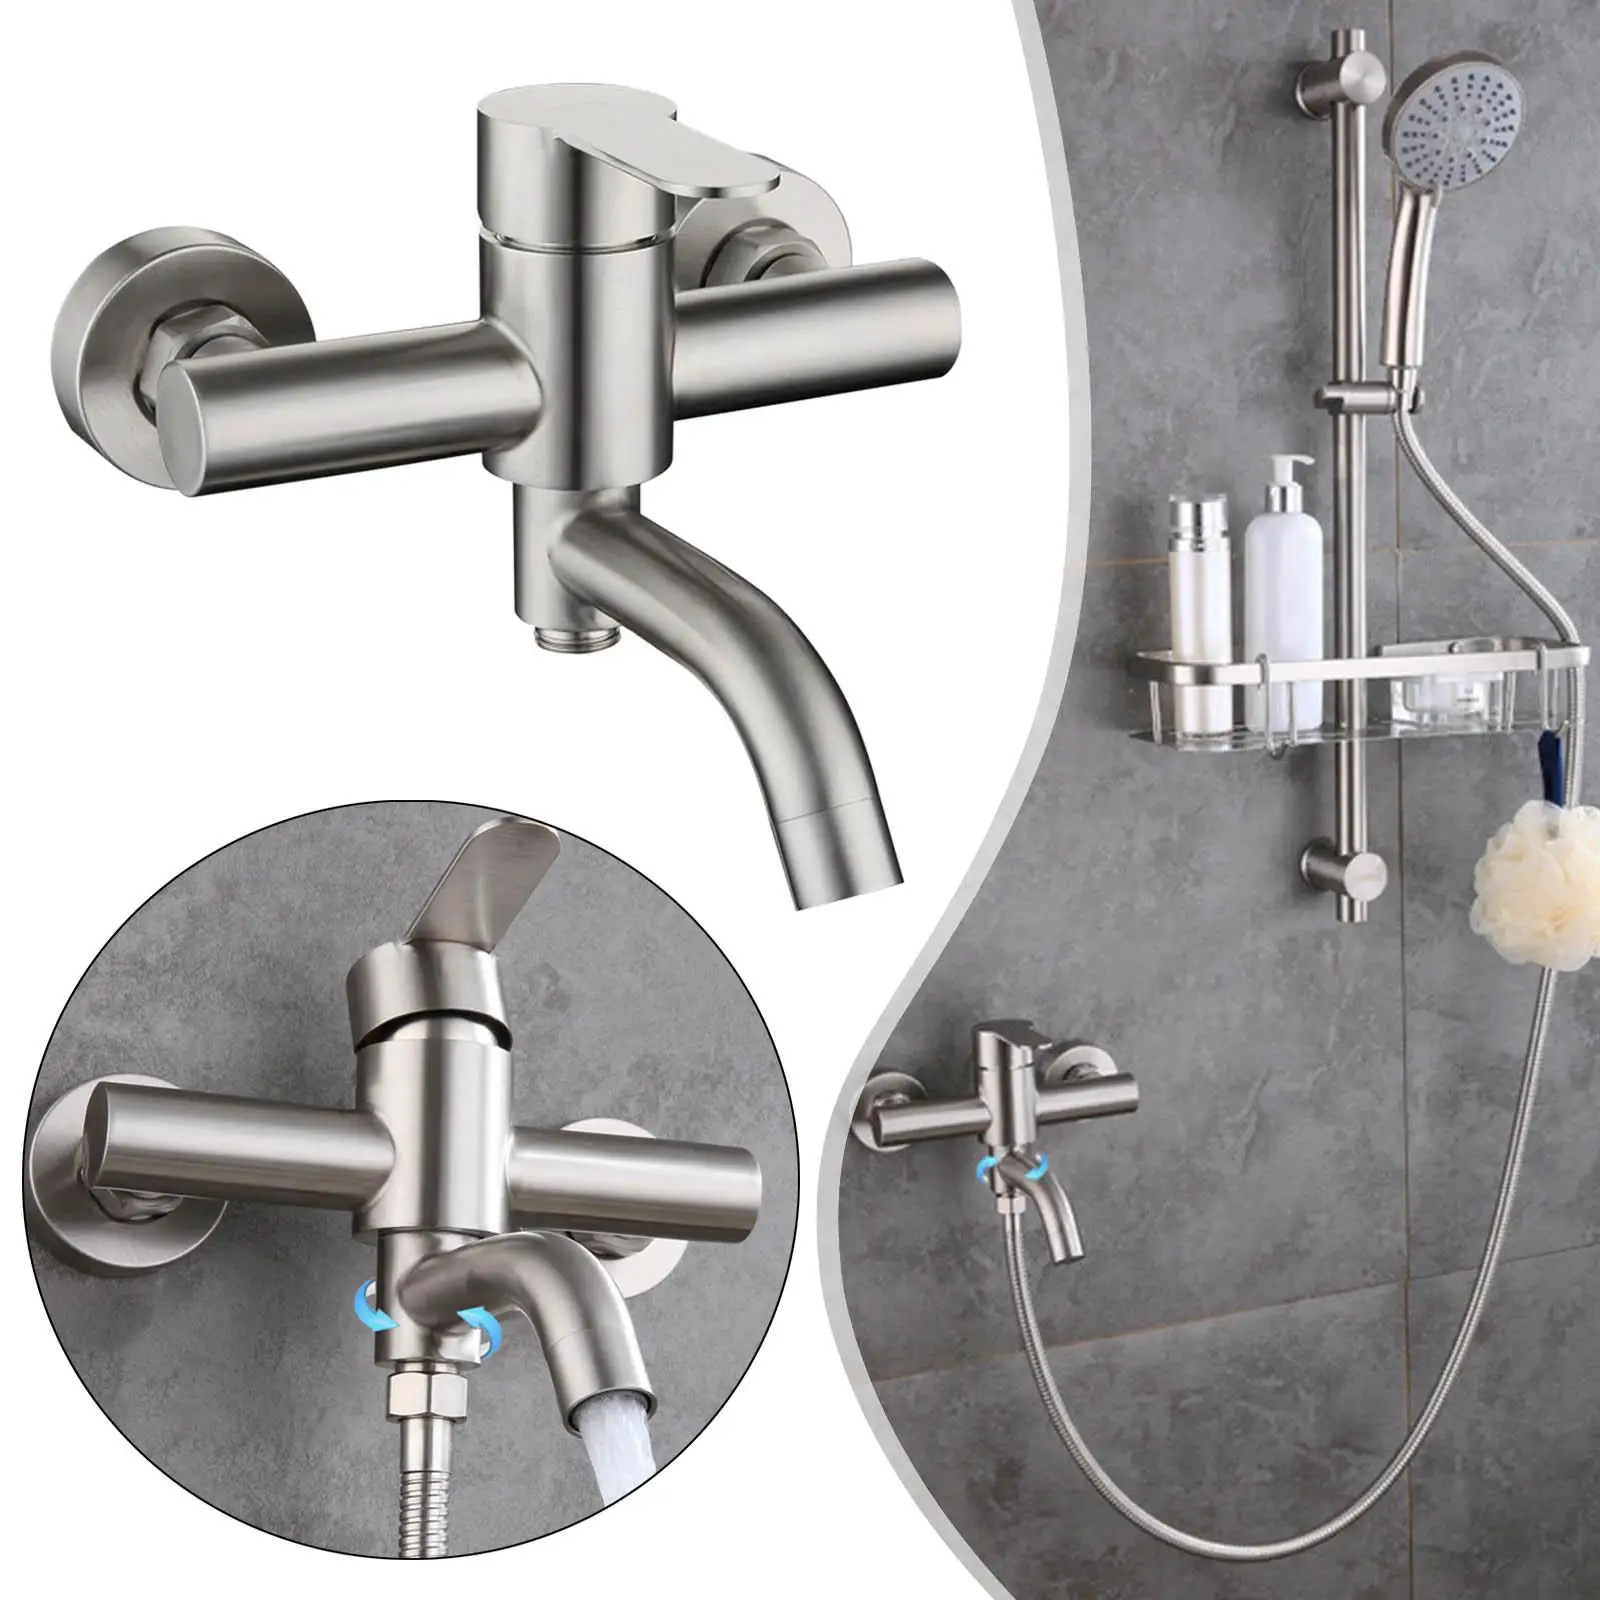 Stainless Steel Shower Mixer Faucet Bathroom System Shower Diverter Ceramic   Mounted Surface Brushed Bath Tub Mixing